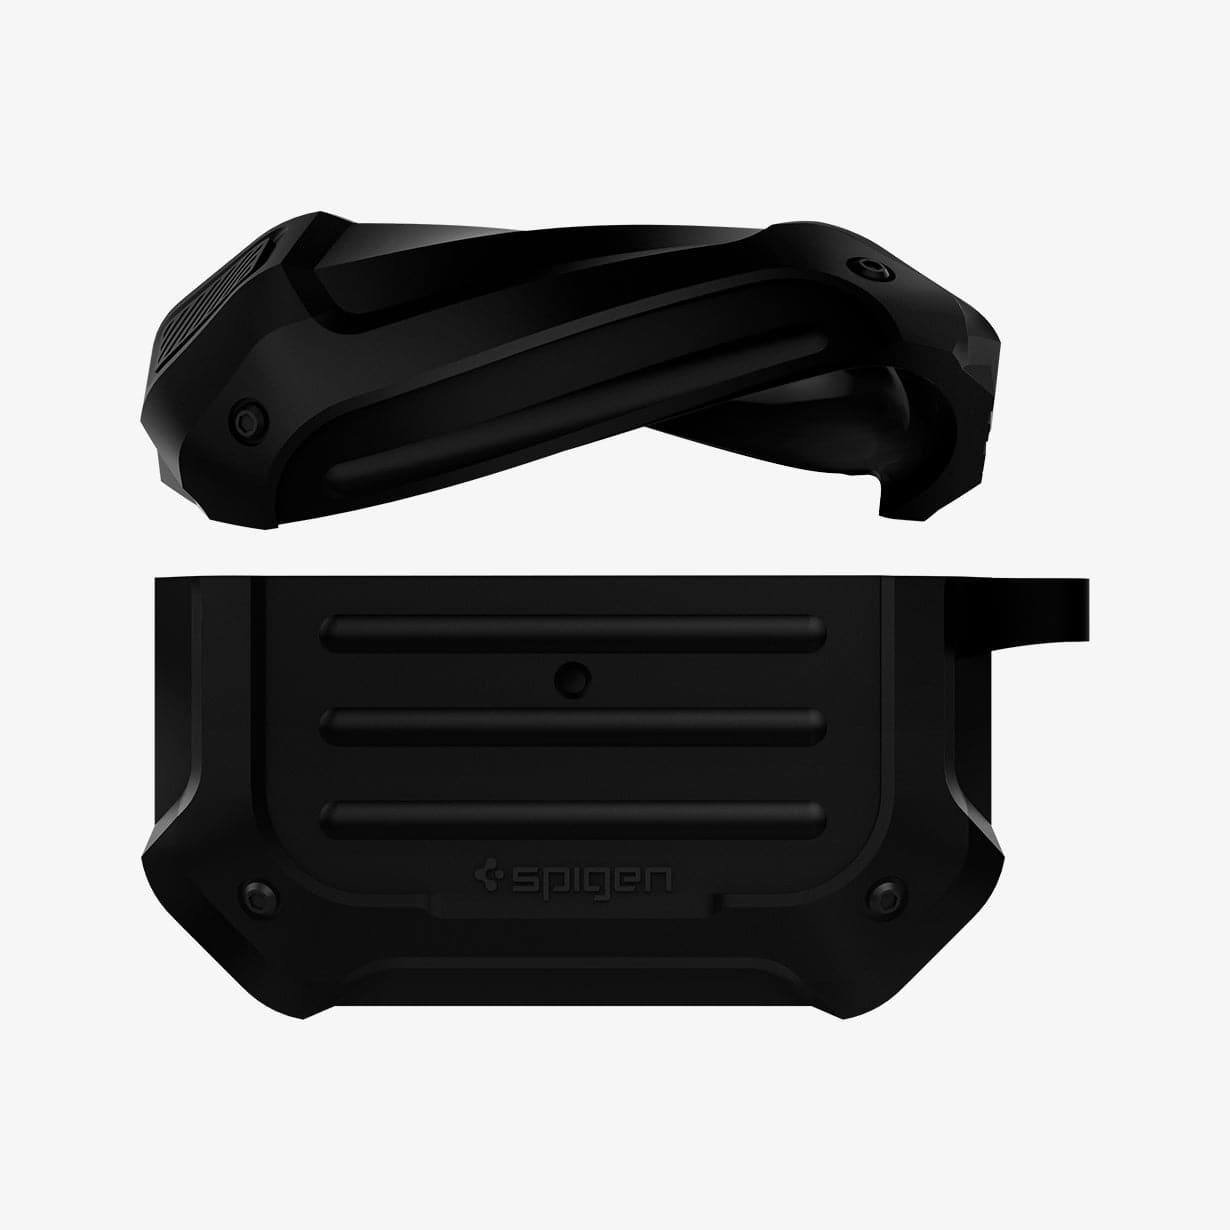 ASD00537 - Apple AirPods Pro Case Tough Armor in black showing the front with top half of case bending and hovering above the bottom half